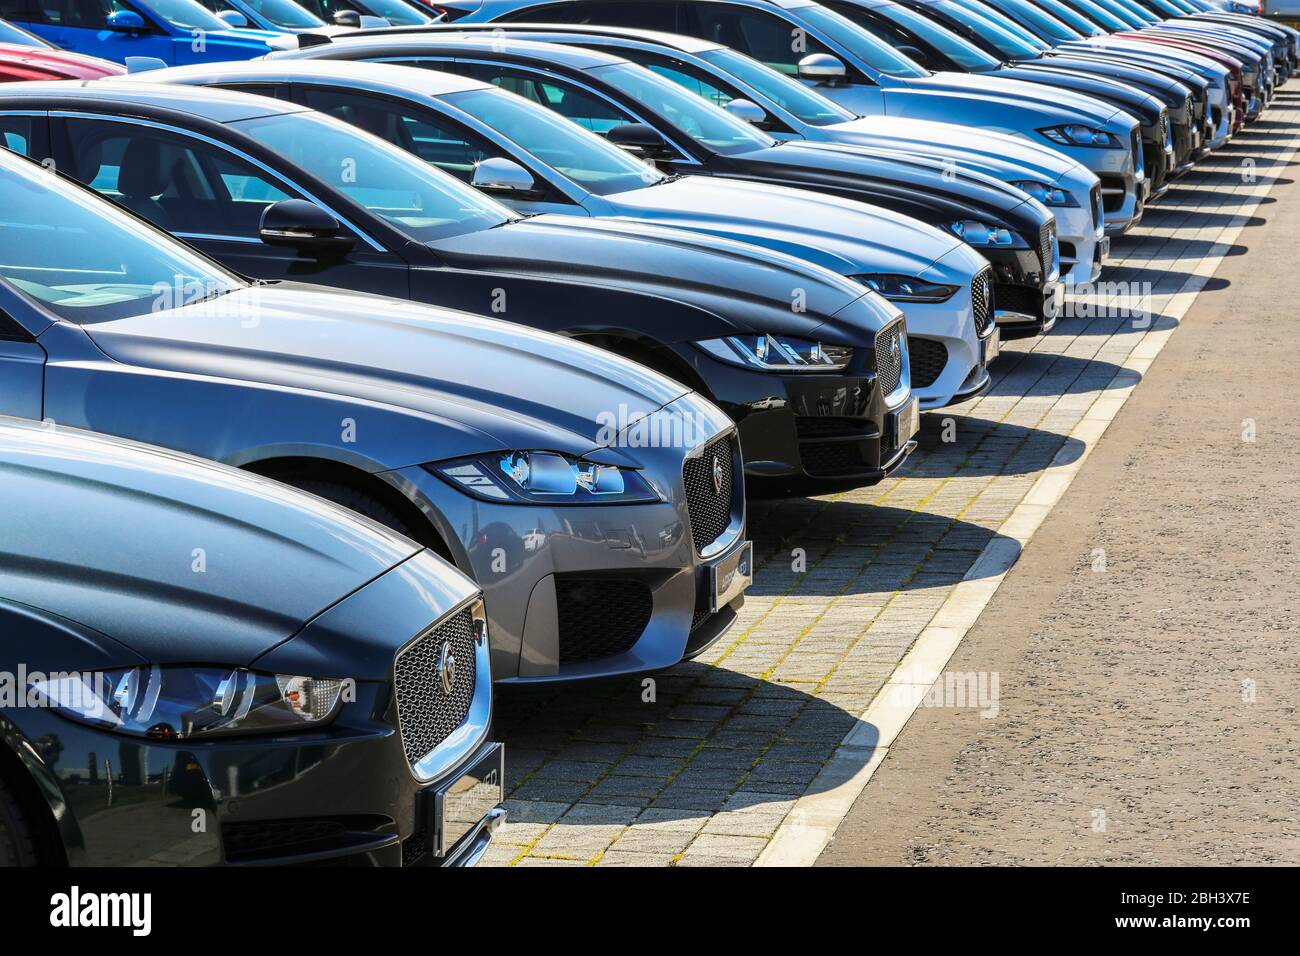 Used Jaguar motor cars for sale in a garage forecourt, Ayr, Scotland Stock Photo